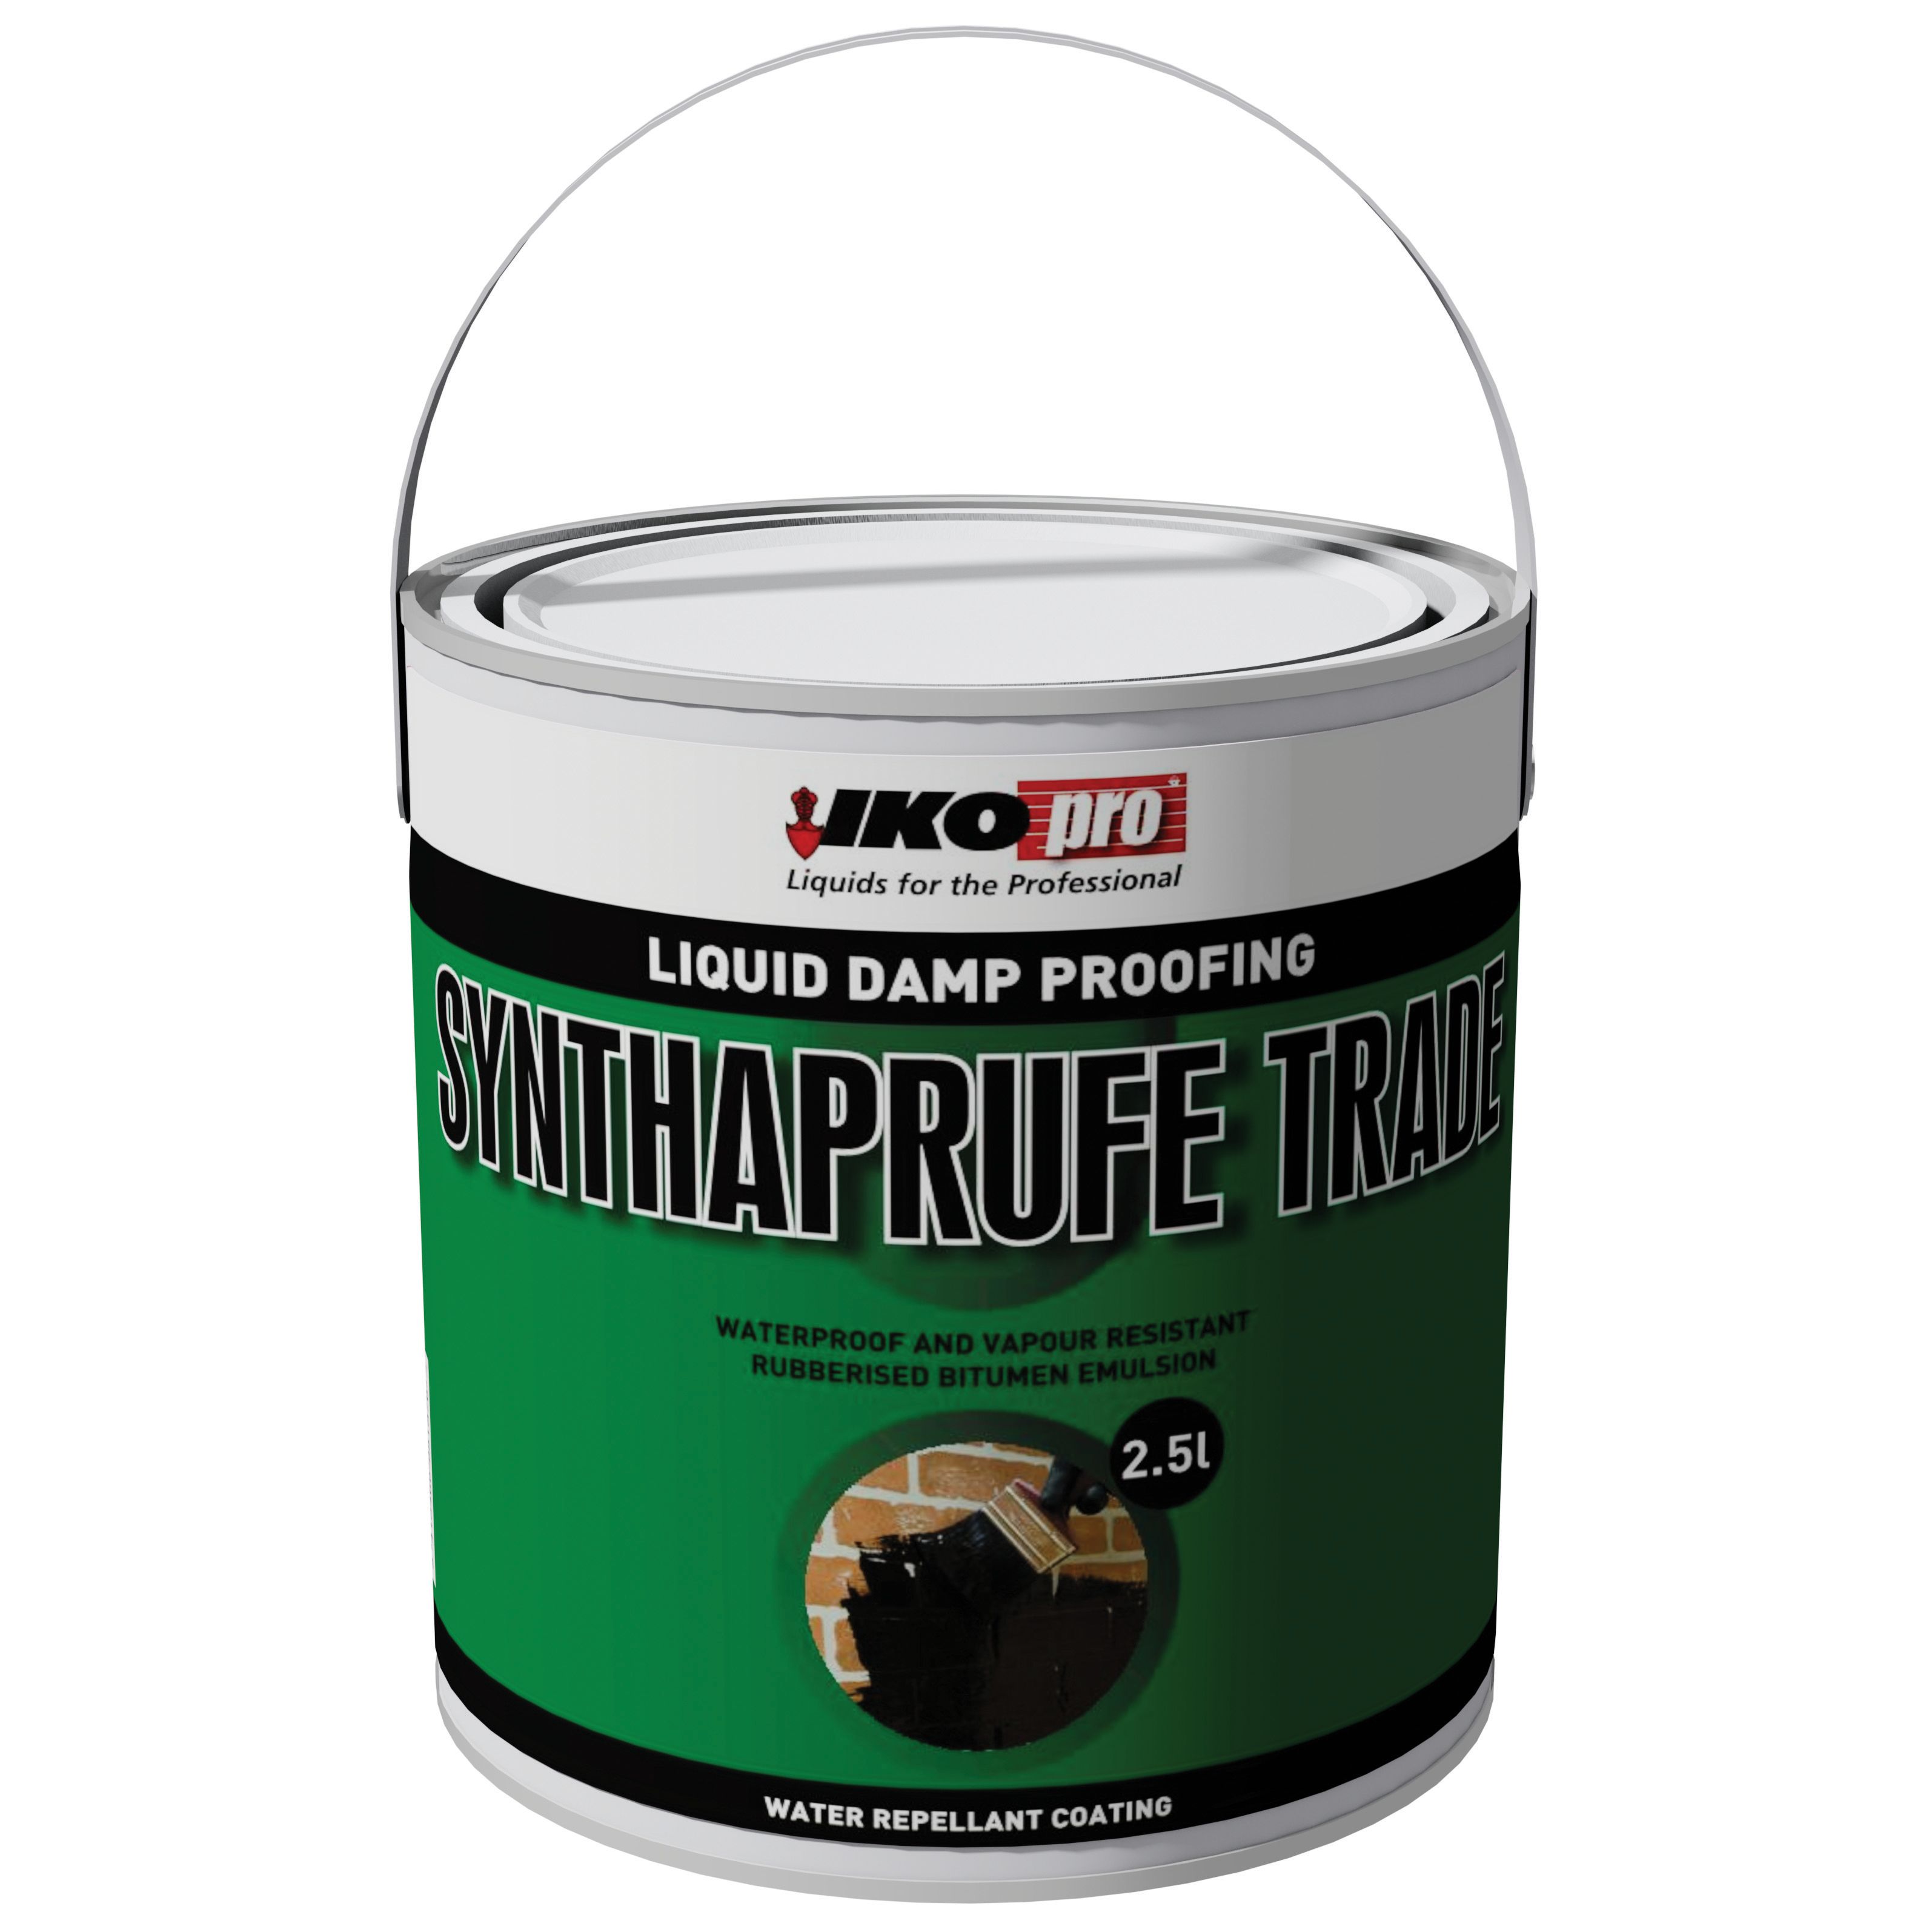 Image of Ikopro Synthaprufe Trade Damp Proofing Liquid - 2.5L